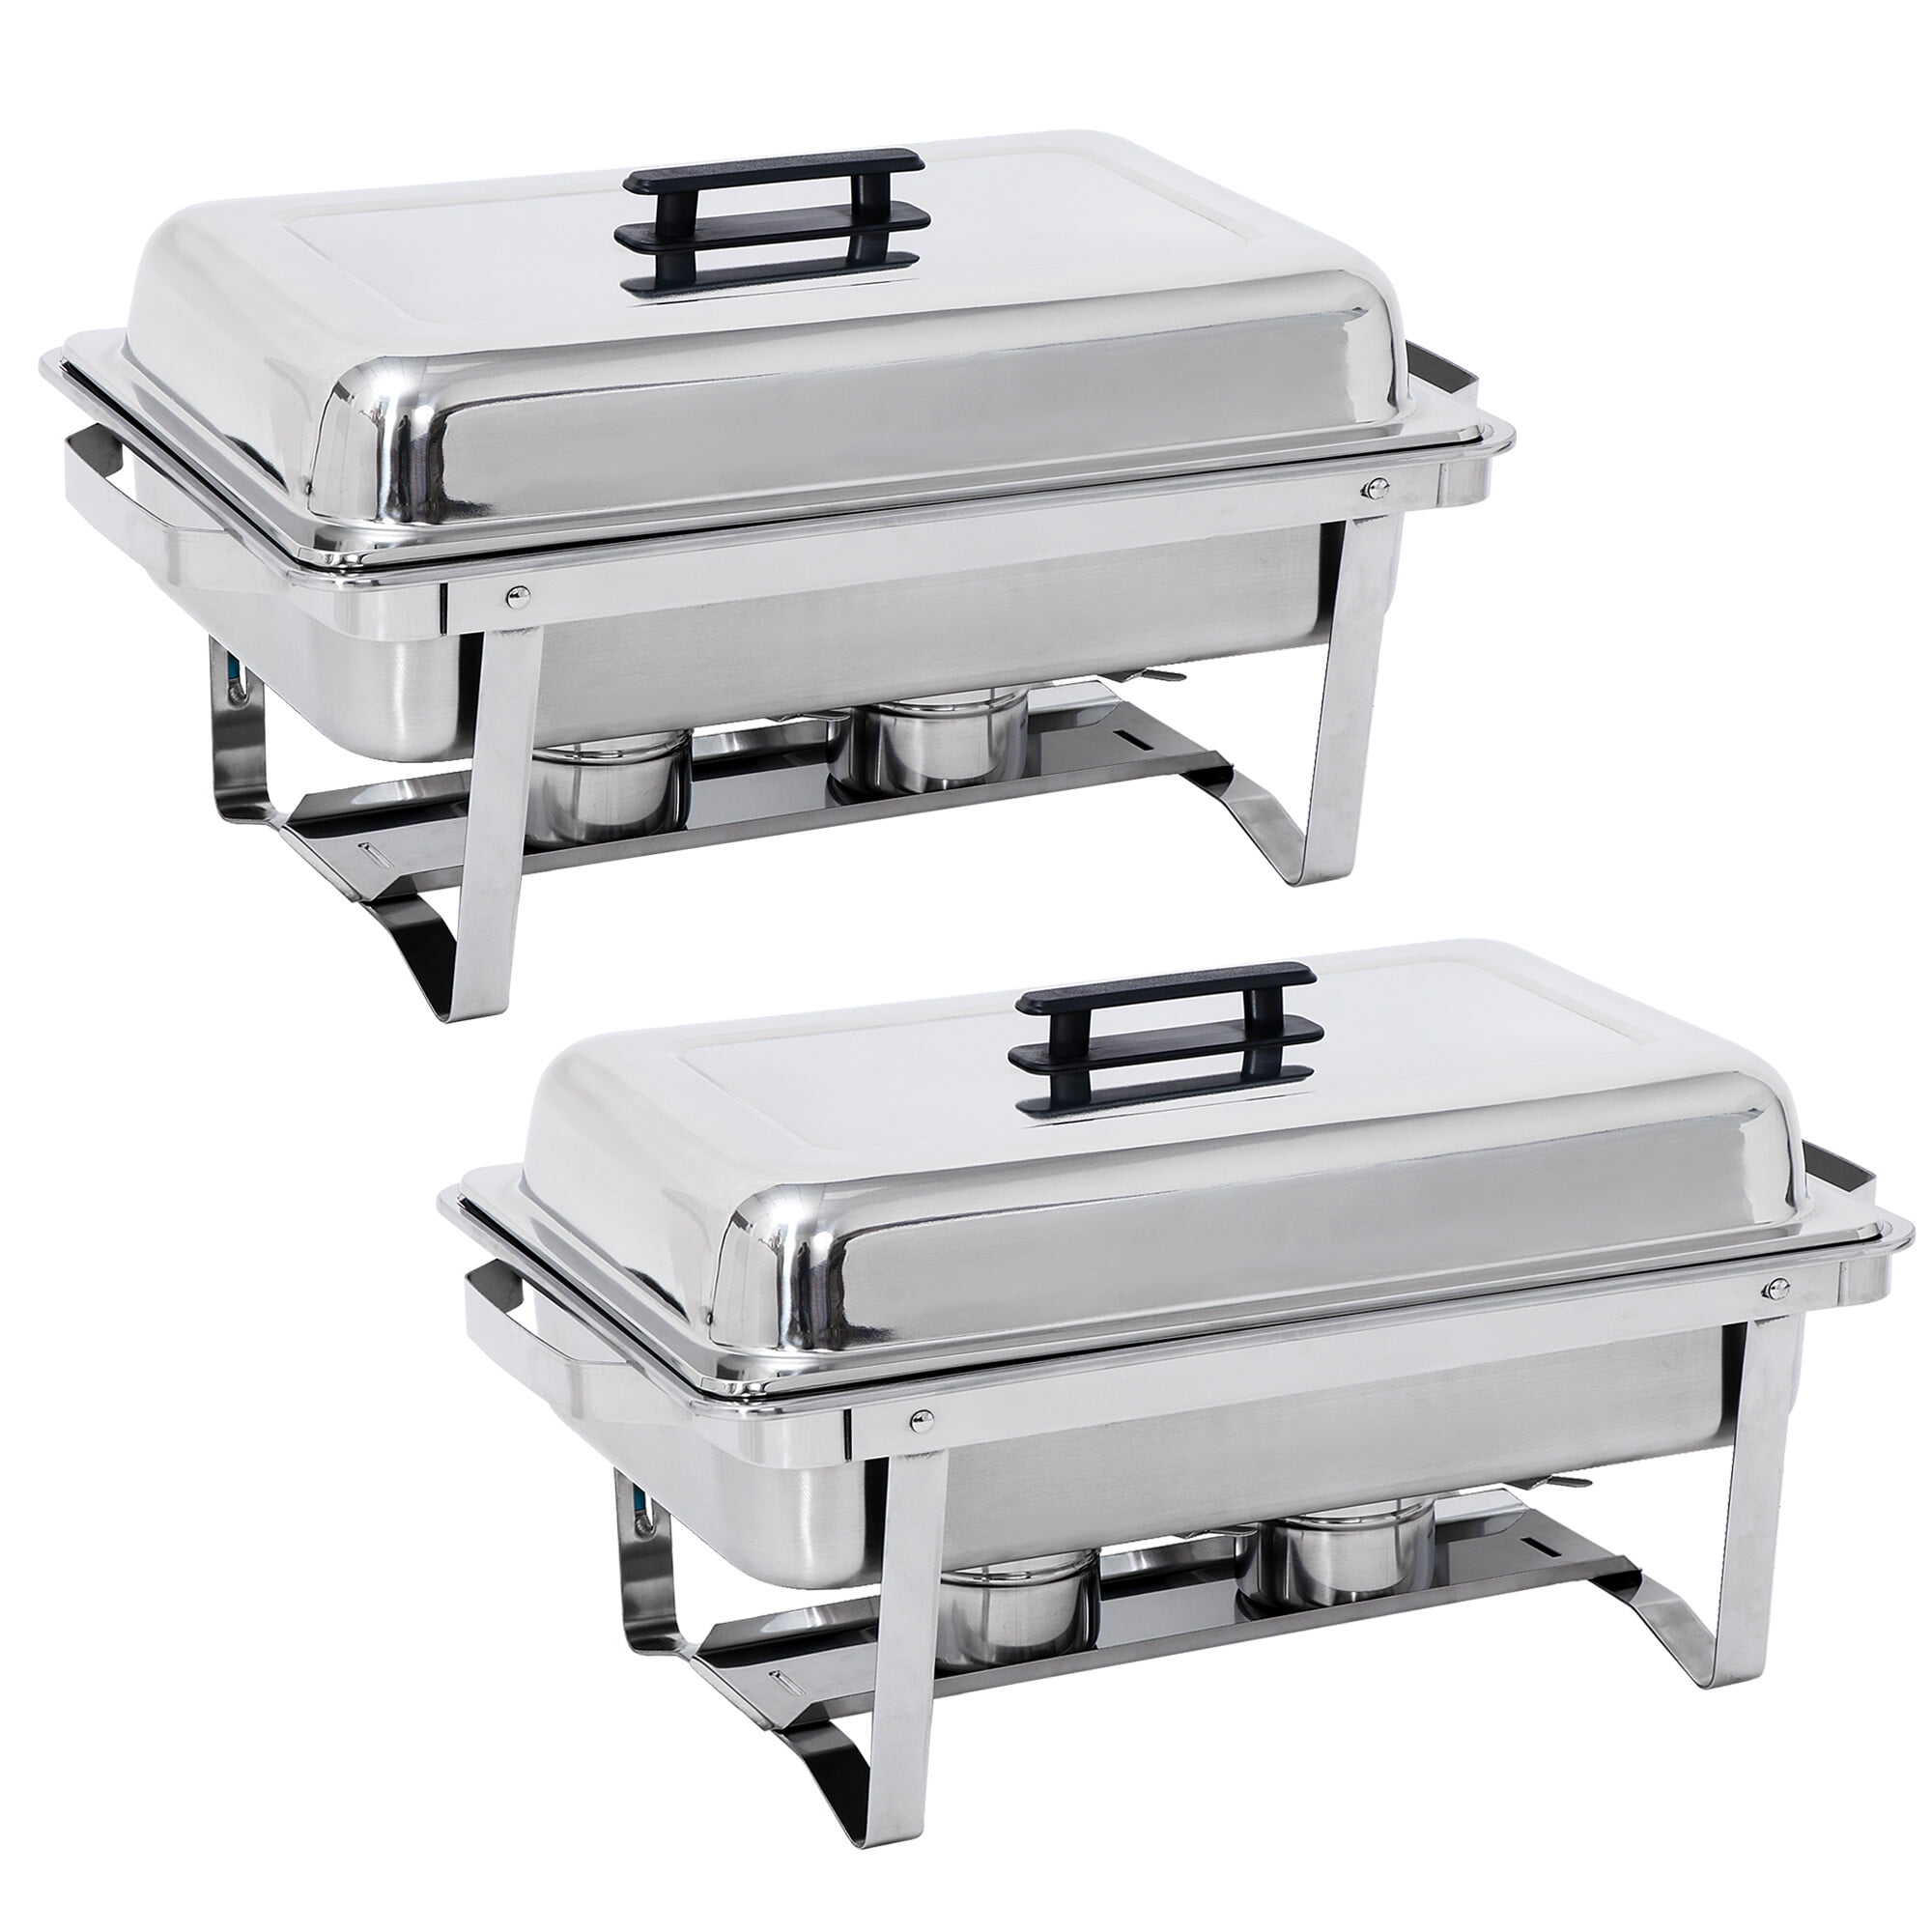 2 Packs Chafing Dish 7.9 QT Stainless Steel Rectangular Chafer Full Size Buffet 